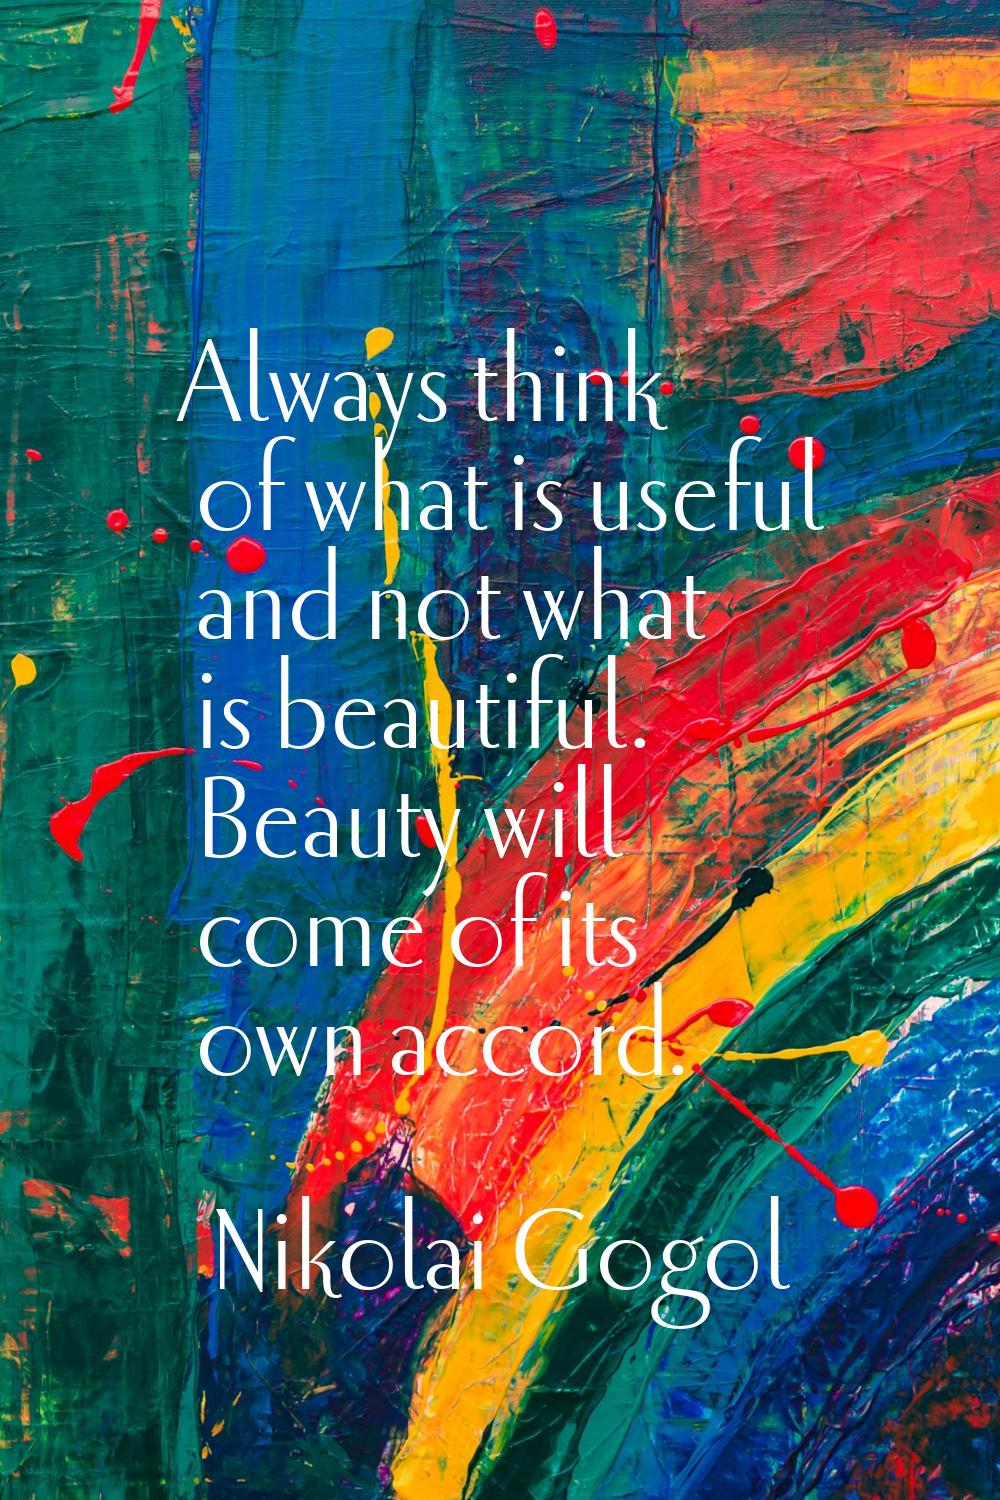 Always think of what is useful and not what is beautiful. Beauty will come of its own accord.